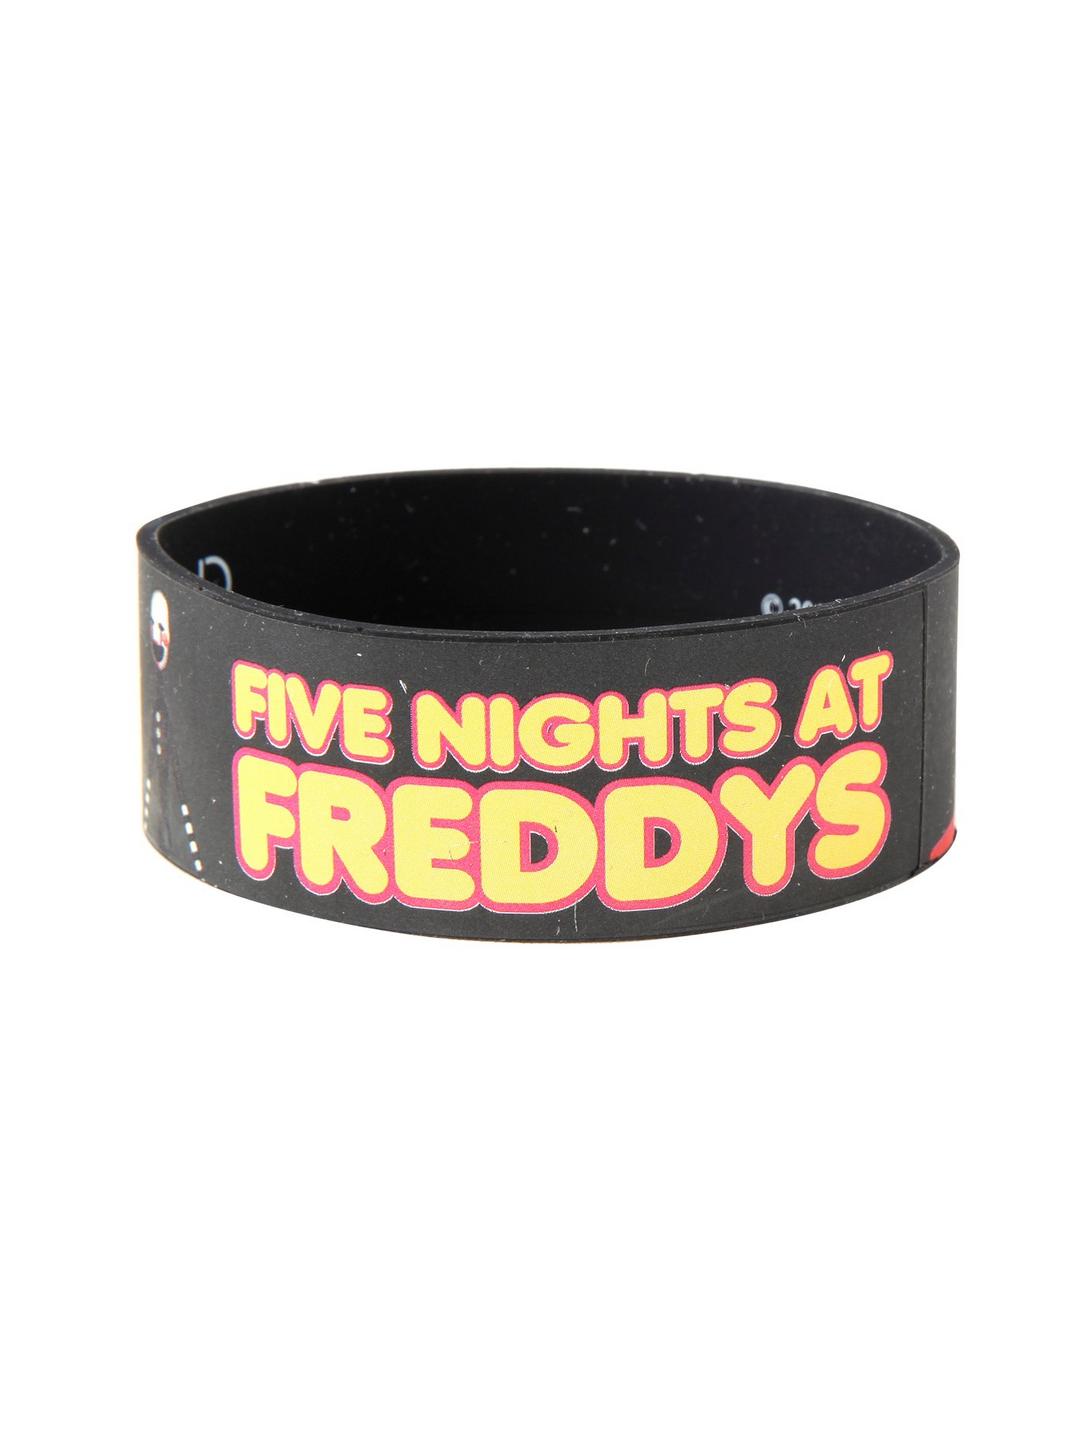 Five Nights At Freddy's Characters Rubber Bracelet, , hi-res